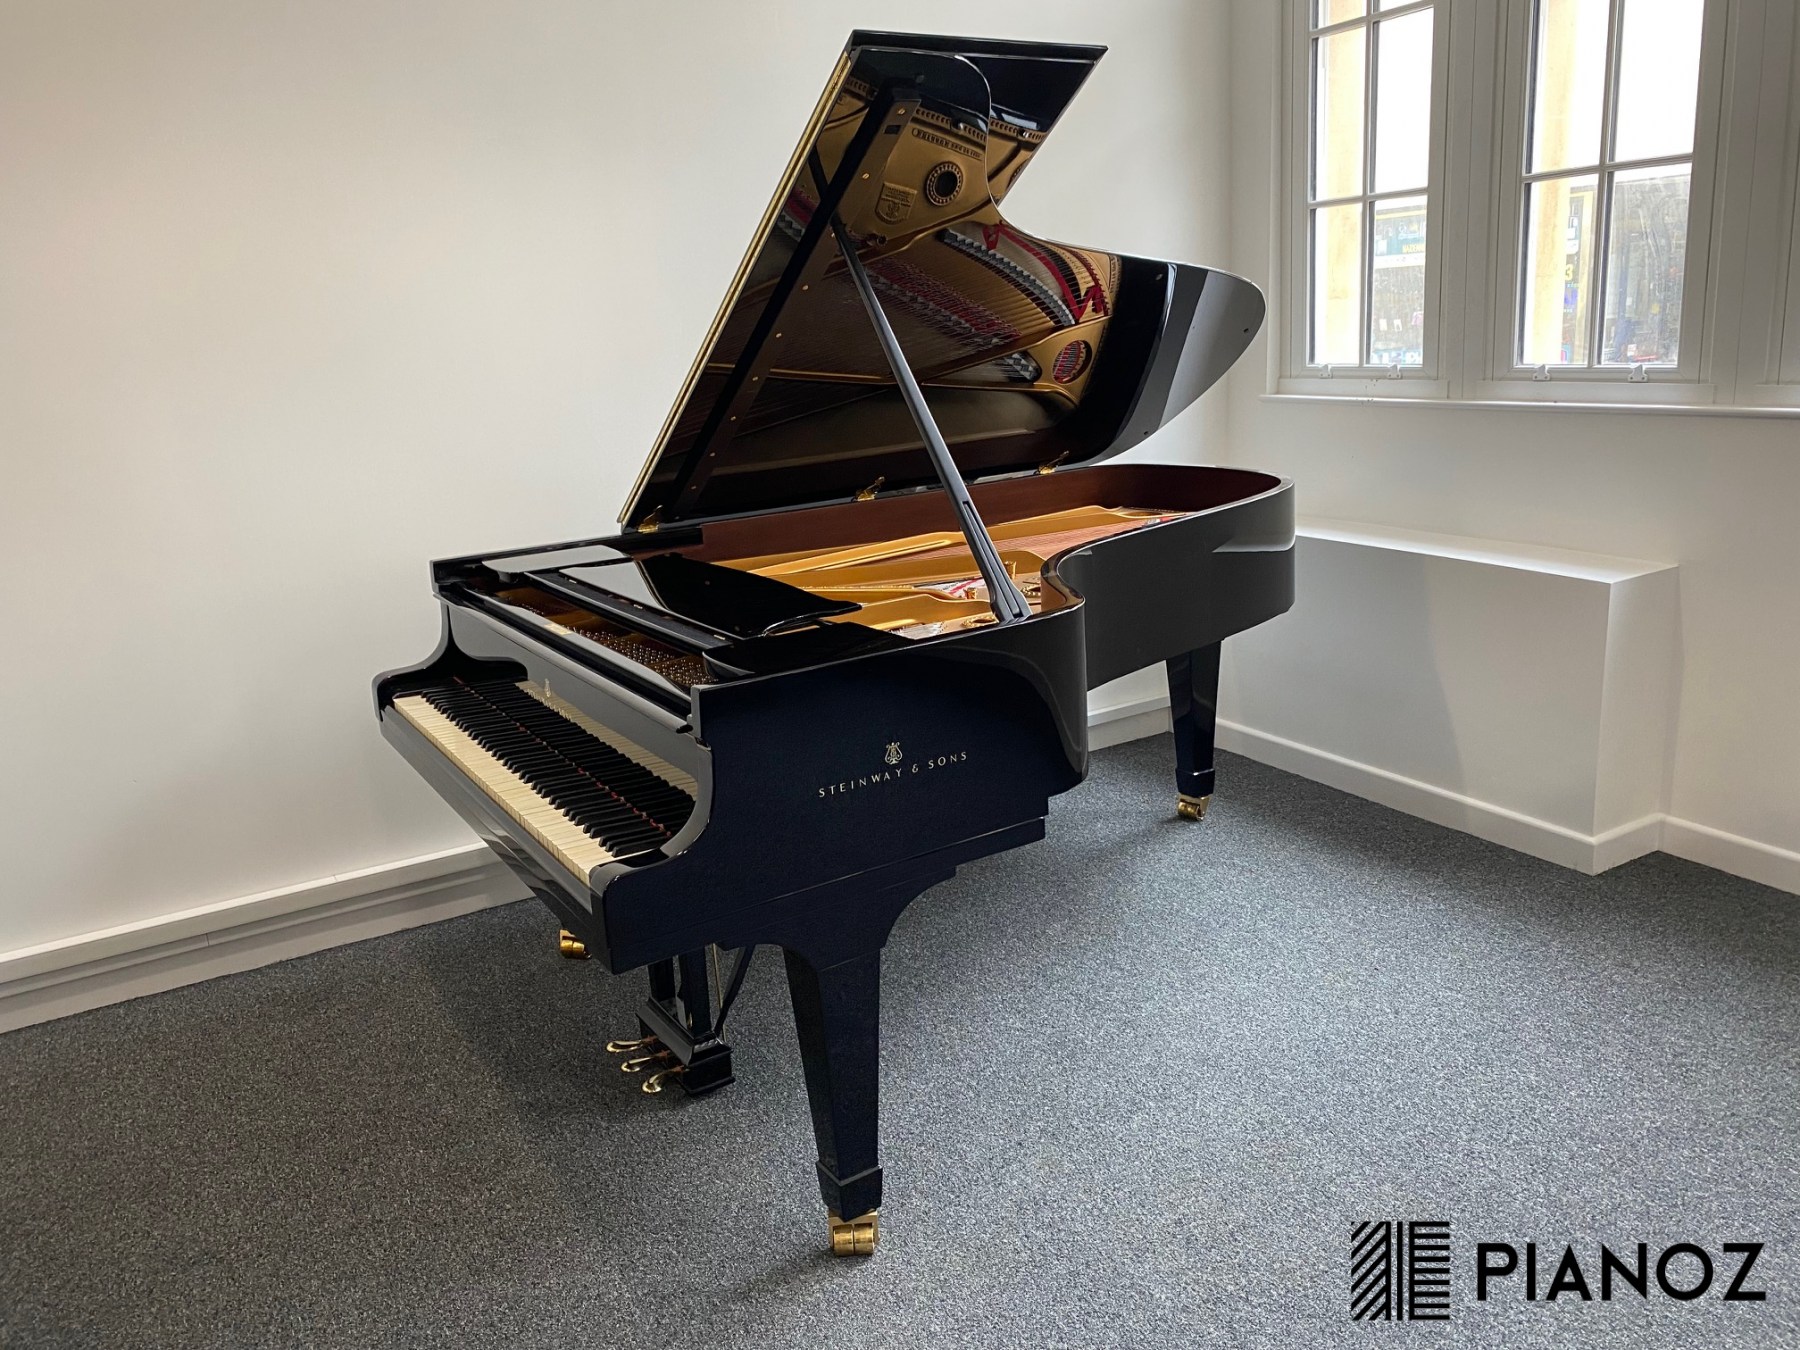 Steinway & Sons  Model C 224  Concert Grand piano for sale in UK